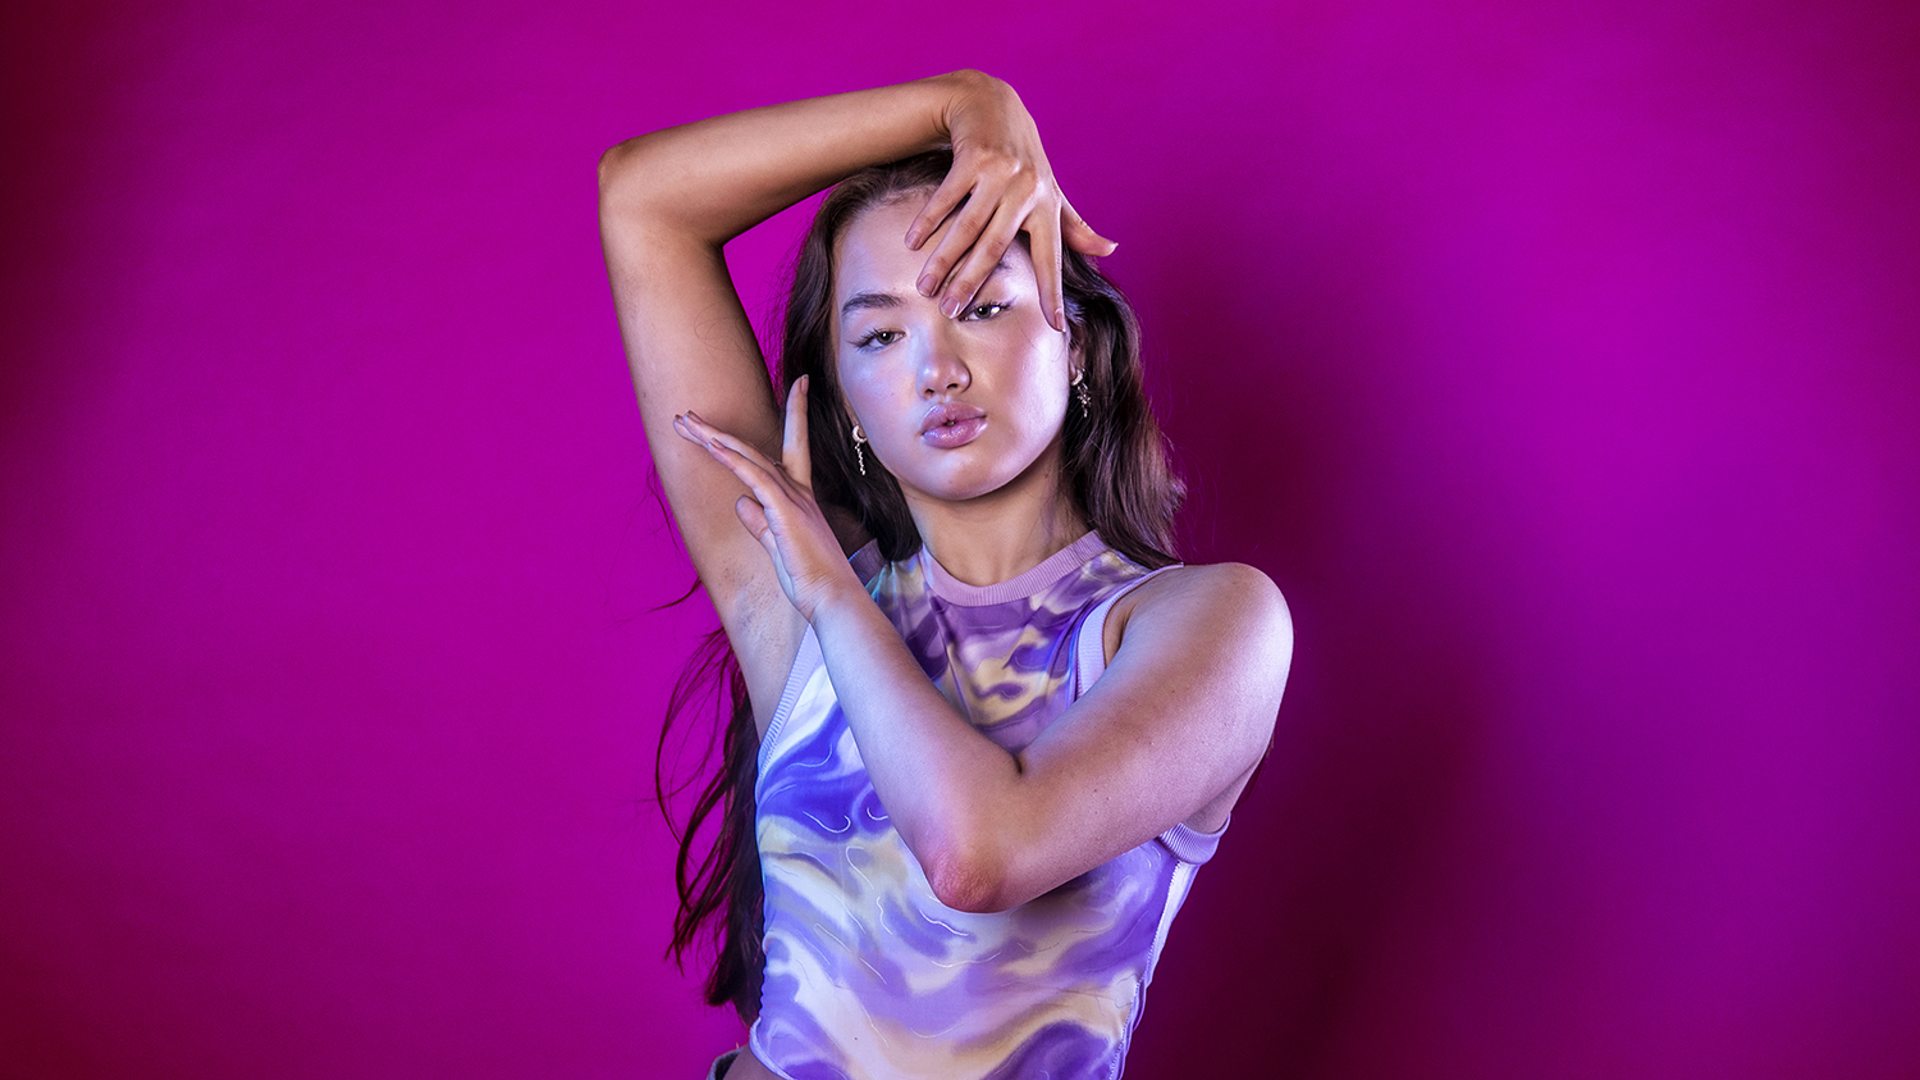 global majority dancer with hands infront and around face on hot pink studio background. Wearing marbled purple crop top.